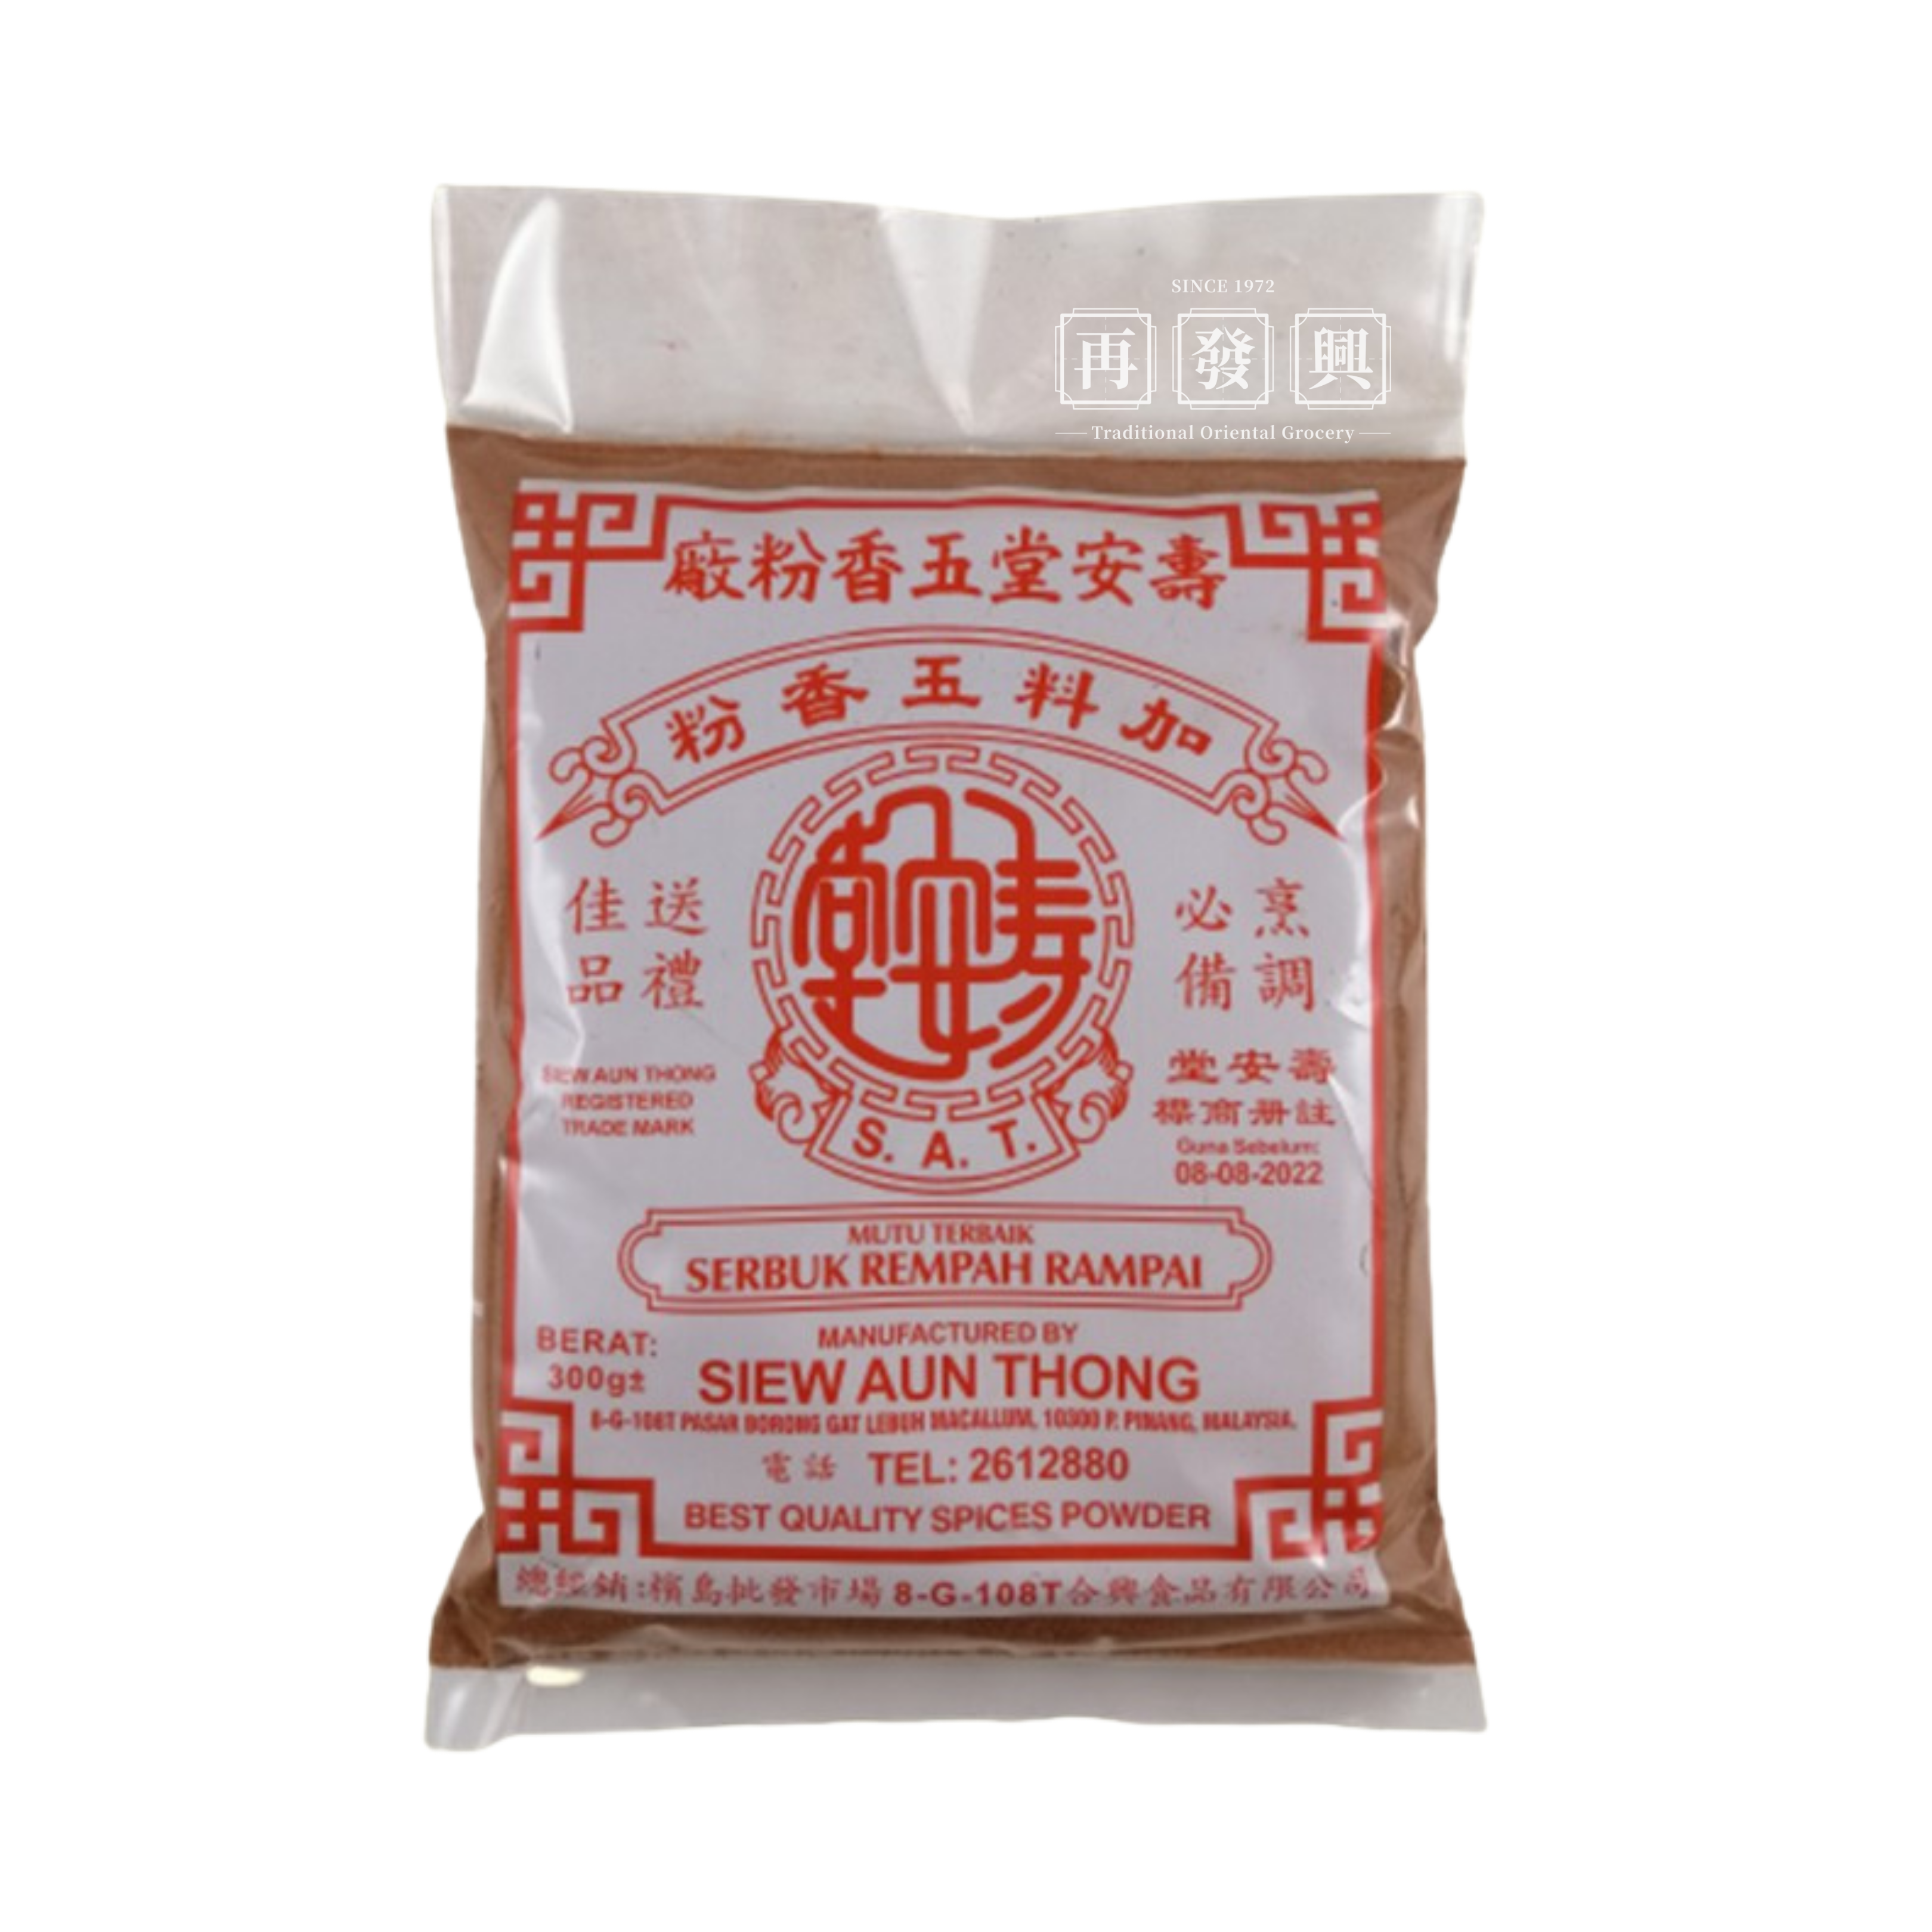 S.A.T. Five Spices 300g